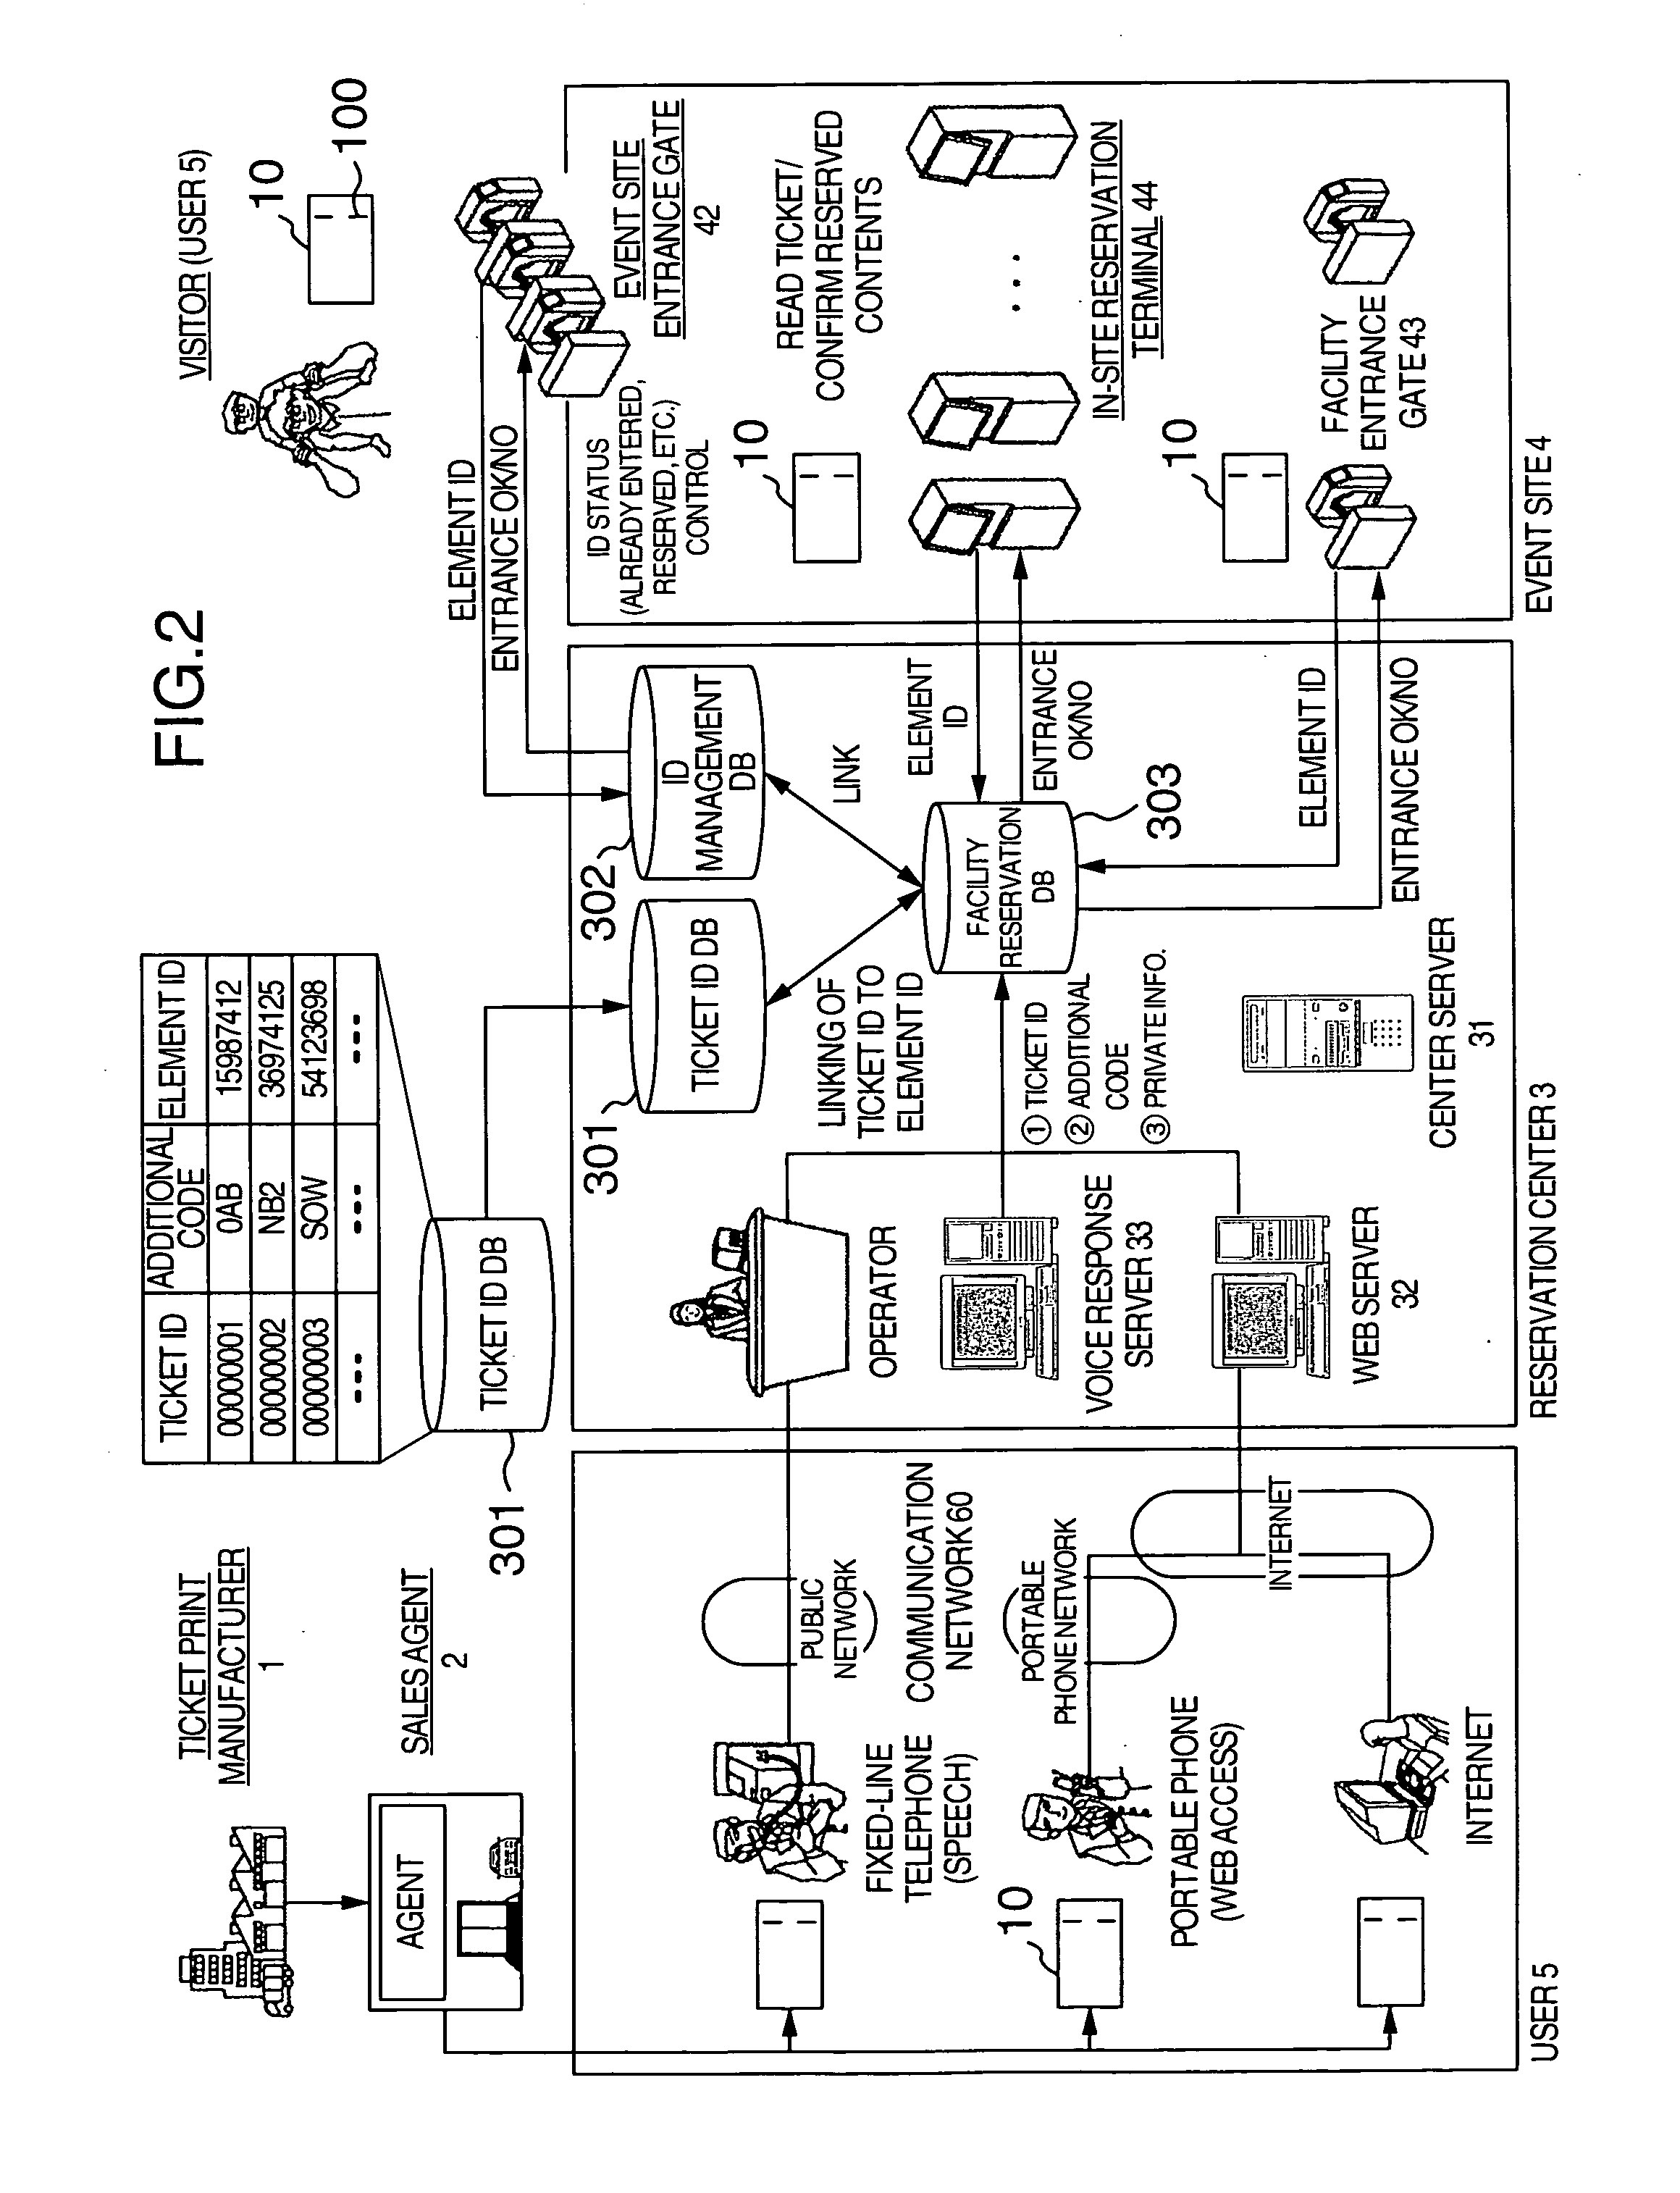 Admission control method and system thereof, and facility reservation confirmation method and system thereof